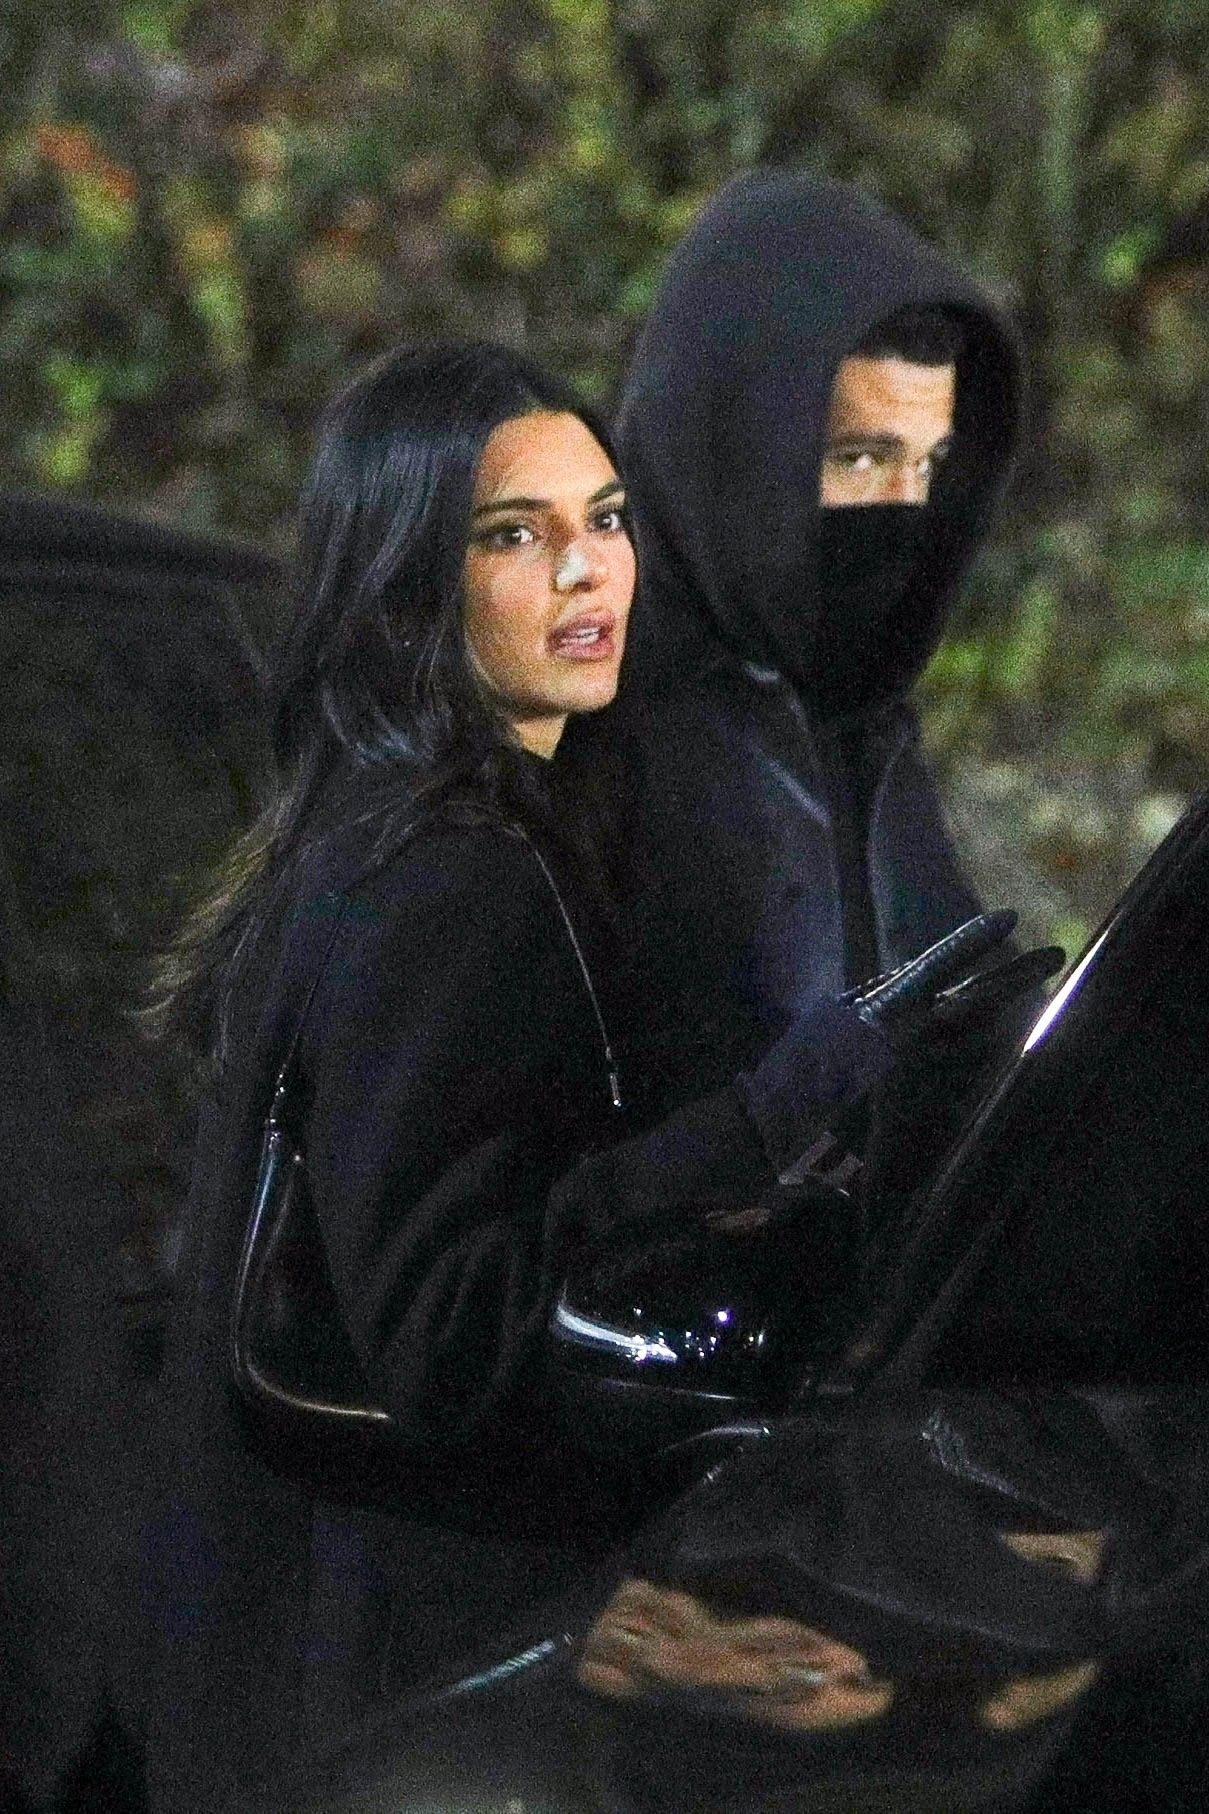 Kendall Jenner Wears Leather Pants for Devin Booker Date Night